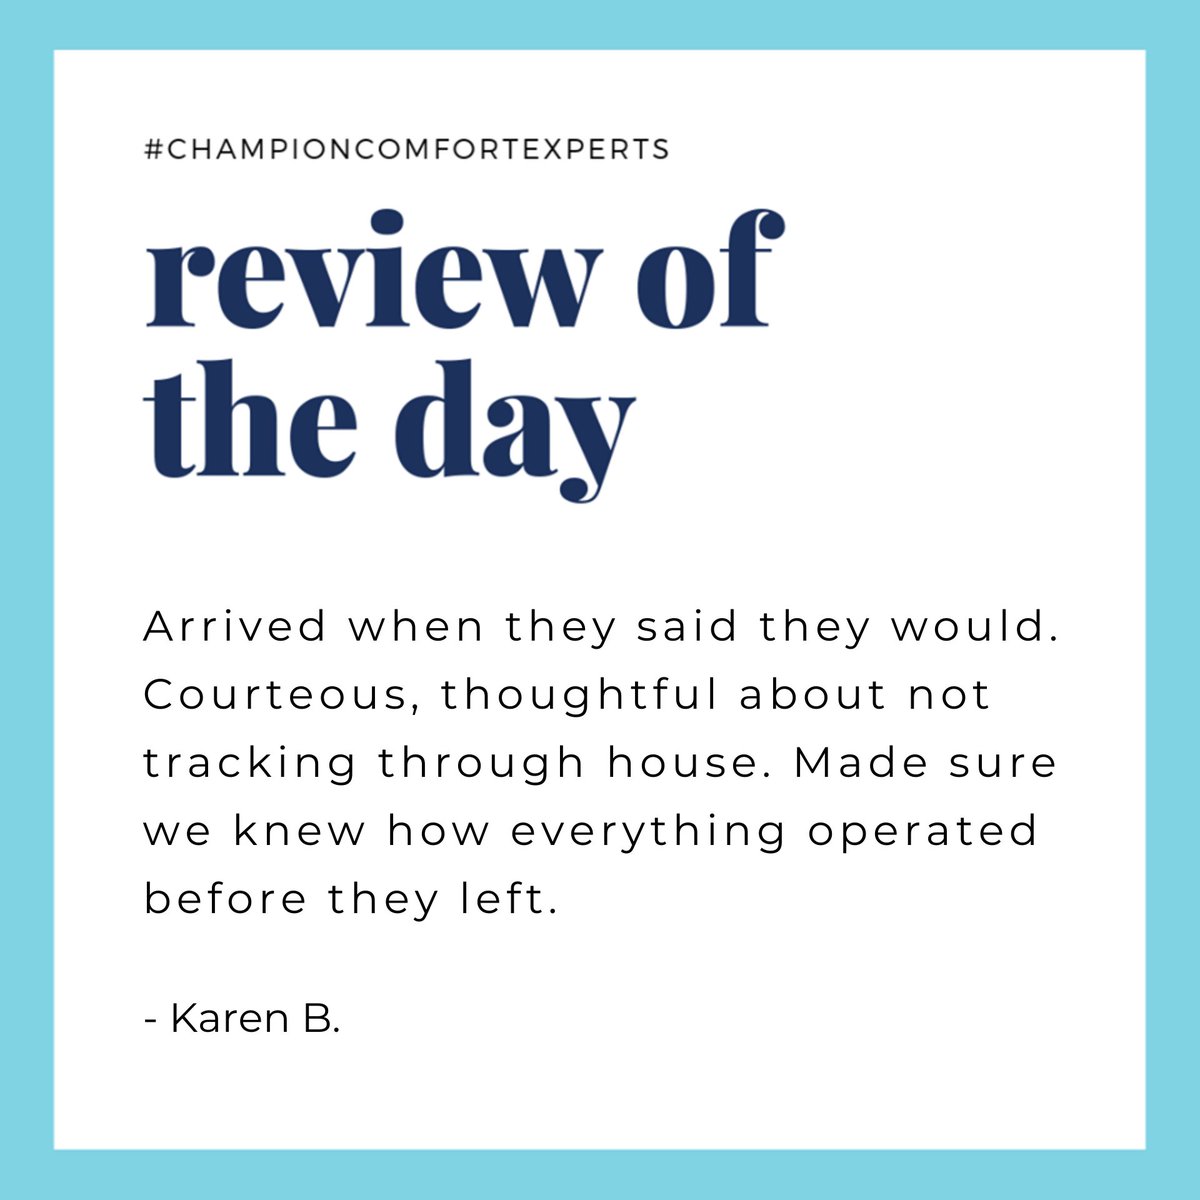 Review of the Month ✨ Thank you for the kind words, Karen! We're so glad to see you had a wonderful experience with us! 
#ReviewOfTheMonth